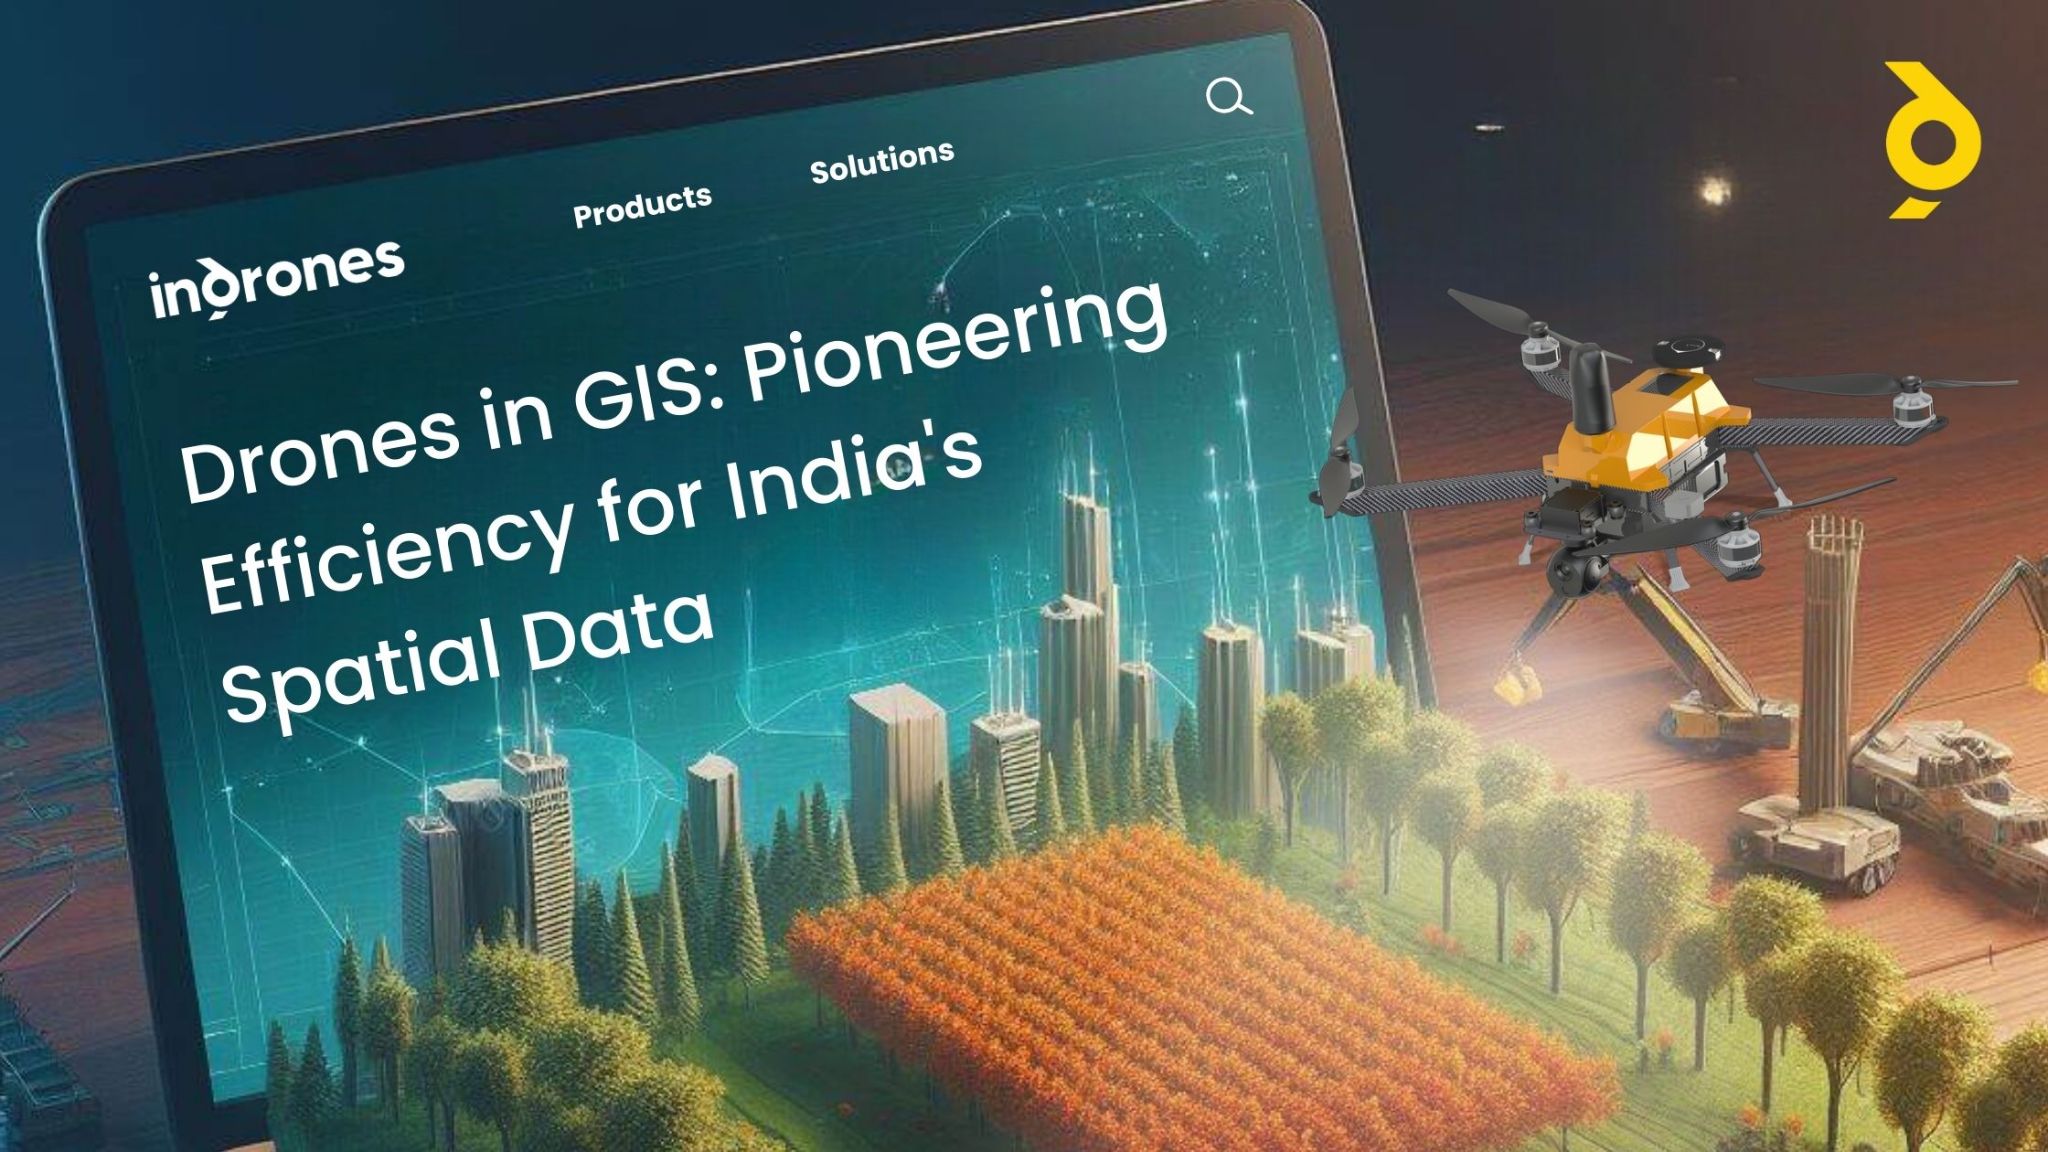 Image containing the title “Drones in GIS: Pioneering Efficiency for India’s Spatial Data”